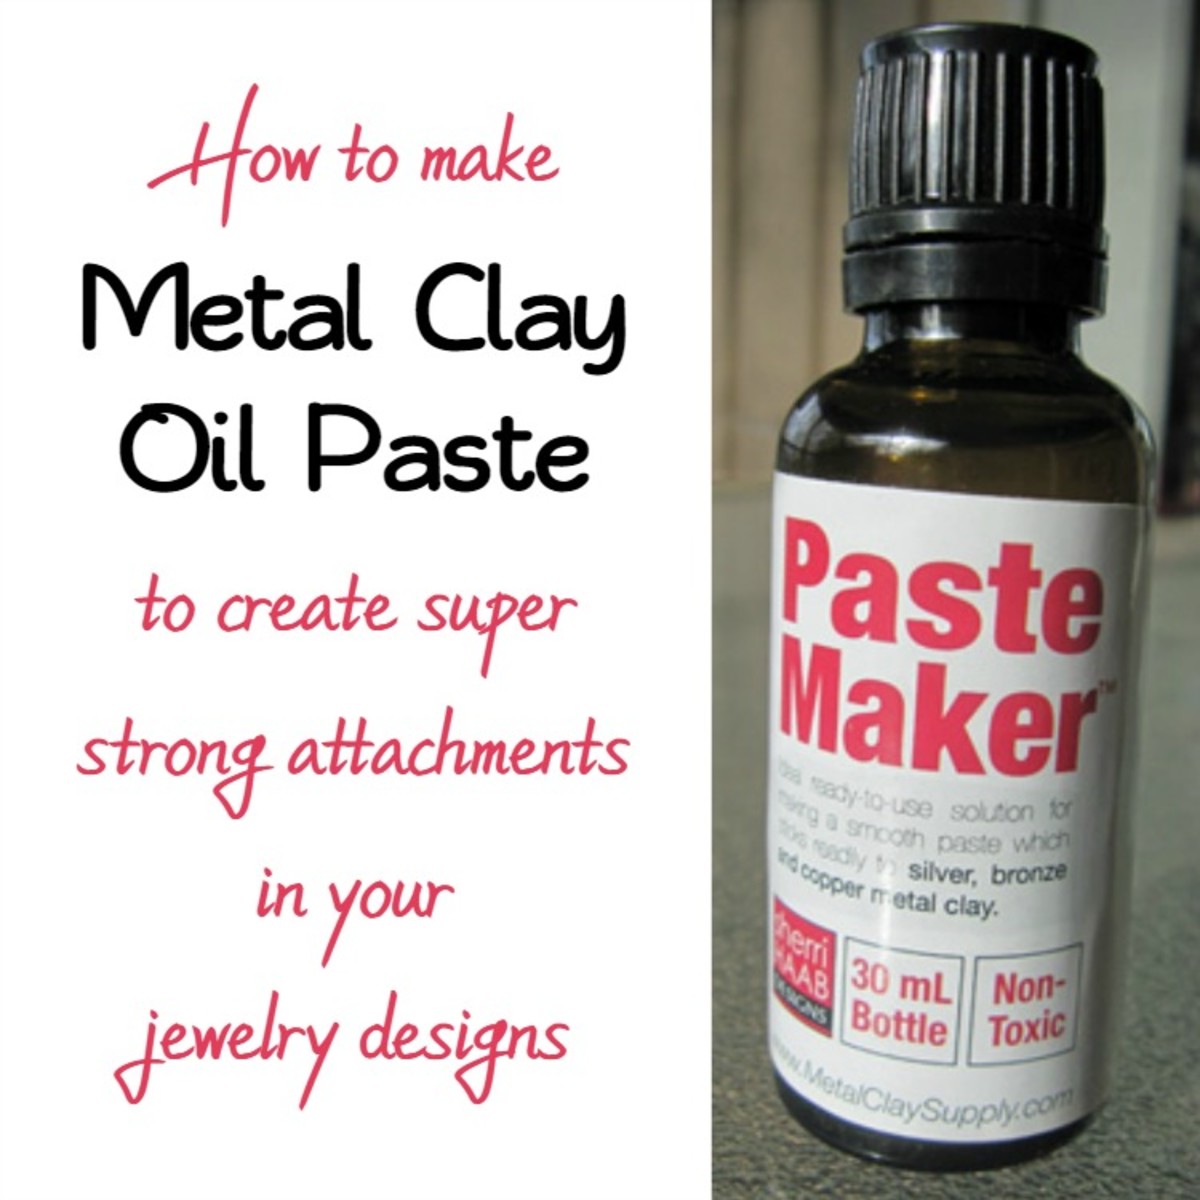 How to make homemade metal clay oil paste with Sherri Haab PasteMaker solution, lavender oil or another plant-based pure essential oil and use it to make strong, secure joins.